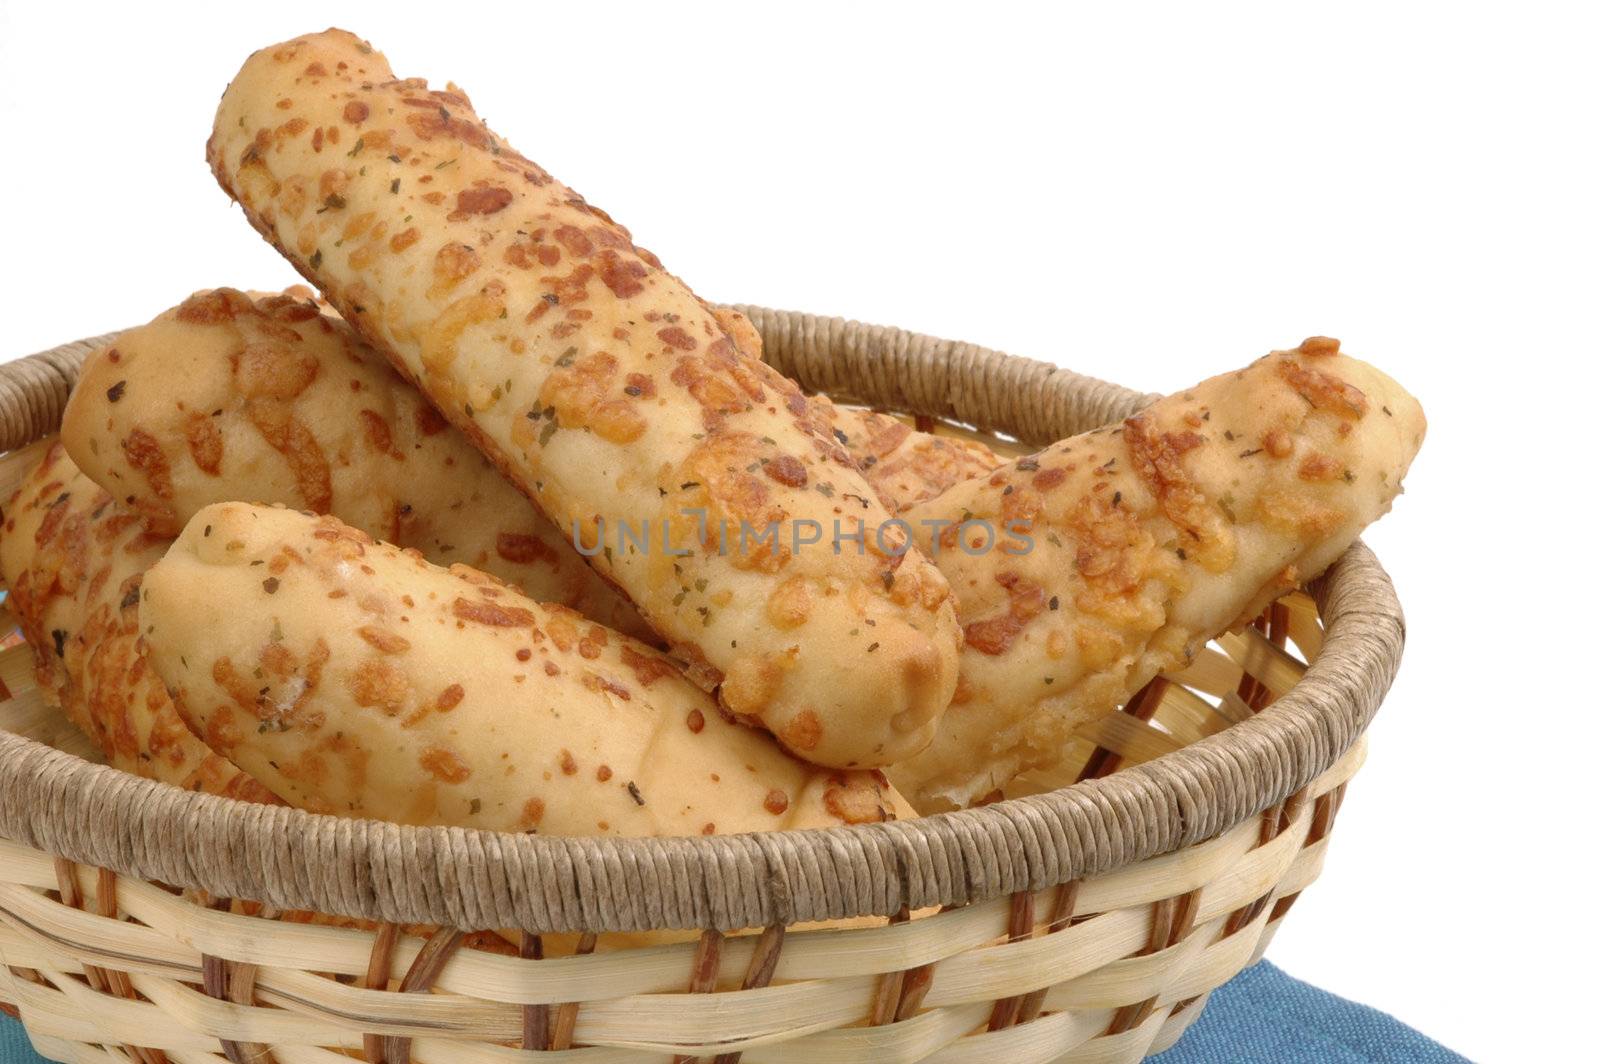 Garlic and Cheese Breadsticks by billberryphotography